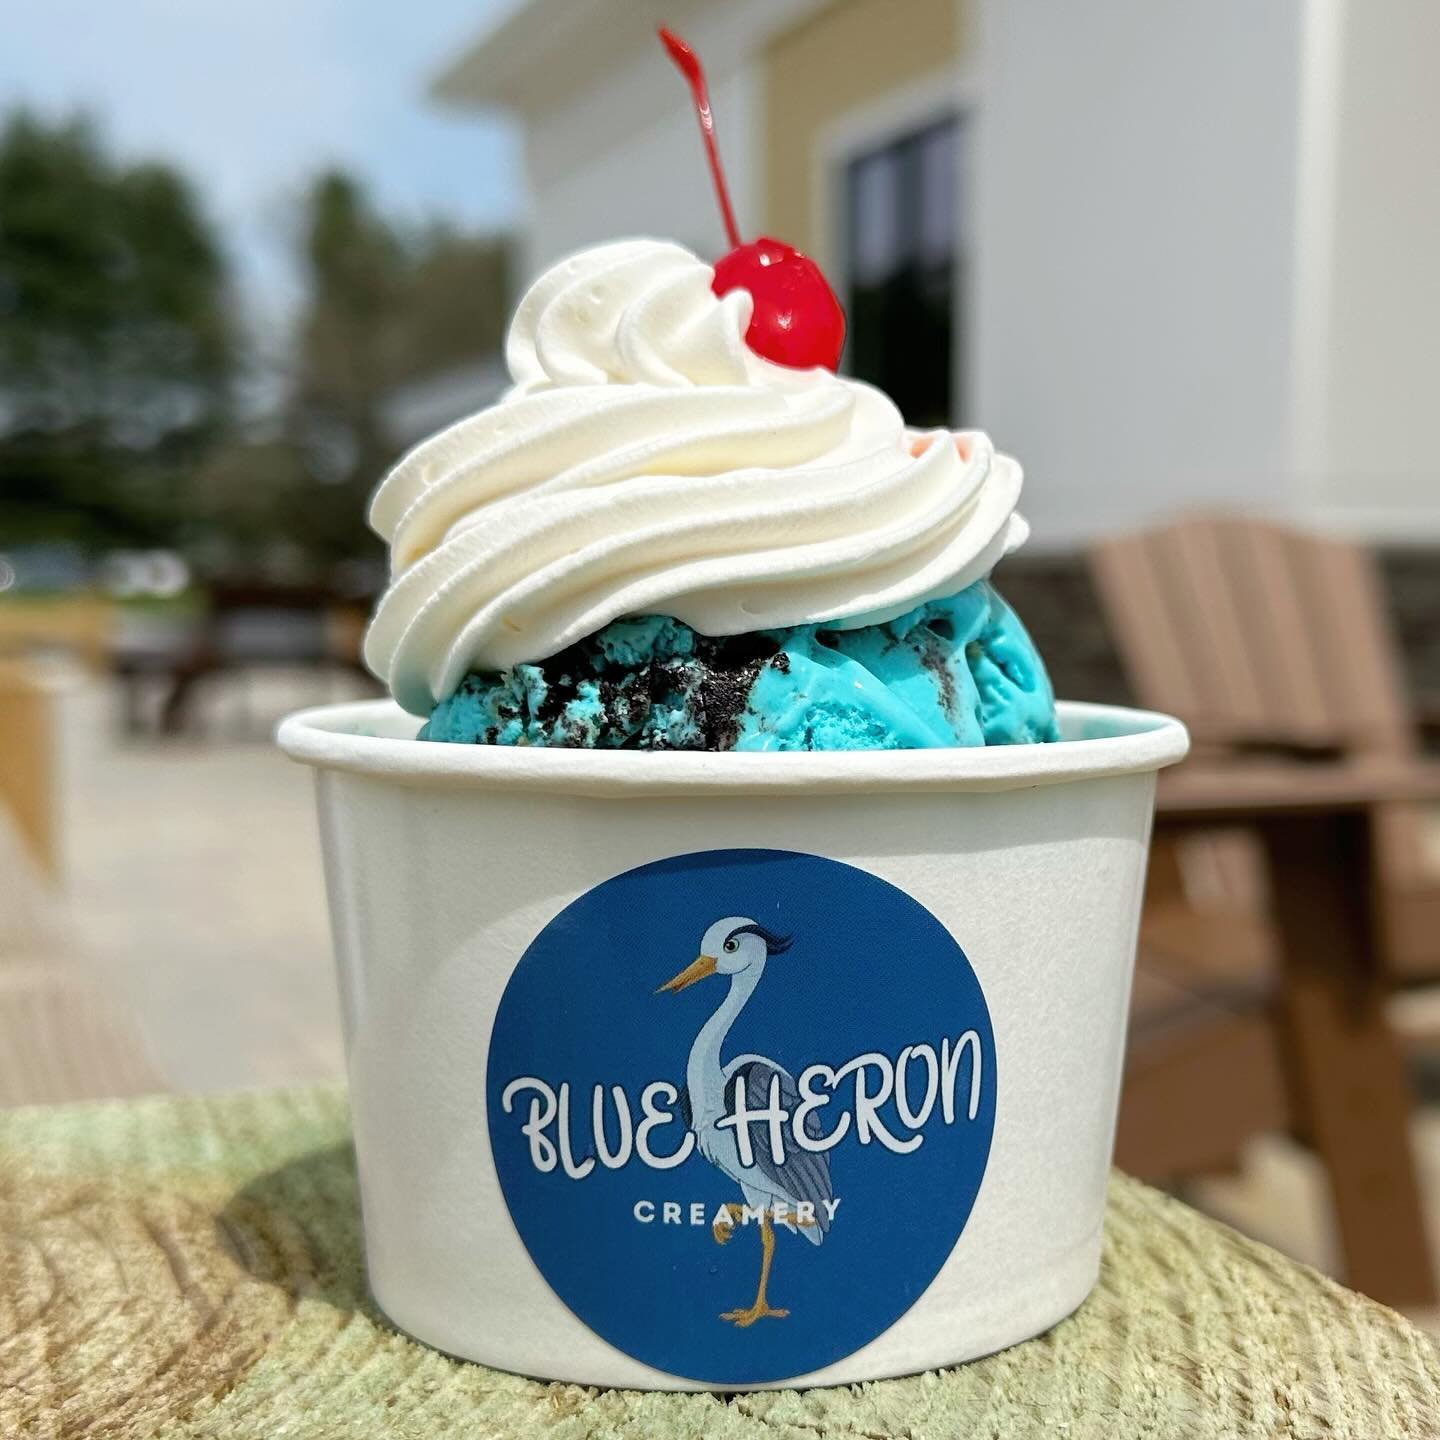 What a beautiful day for ice cream!🍦 

We are open in Hartford and Enfield today from 12 pm - 10 pm! Come stop by!

Also, make sure you bring your furry sidekicks to our Enfield location for a pup cup! FREE with any purchase! 

See you soon 😋 

#in